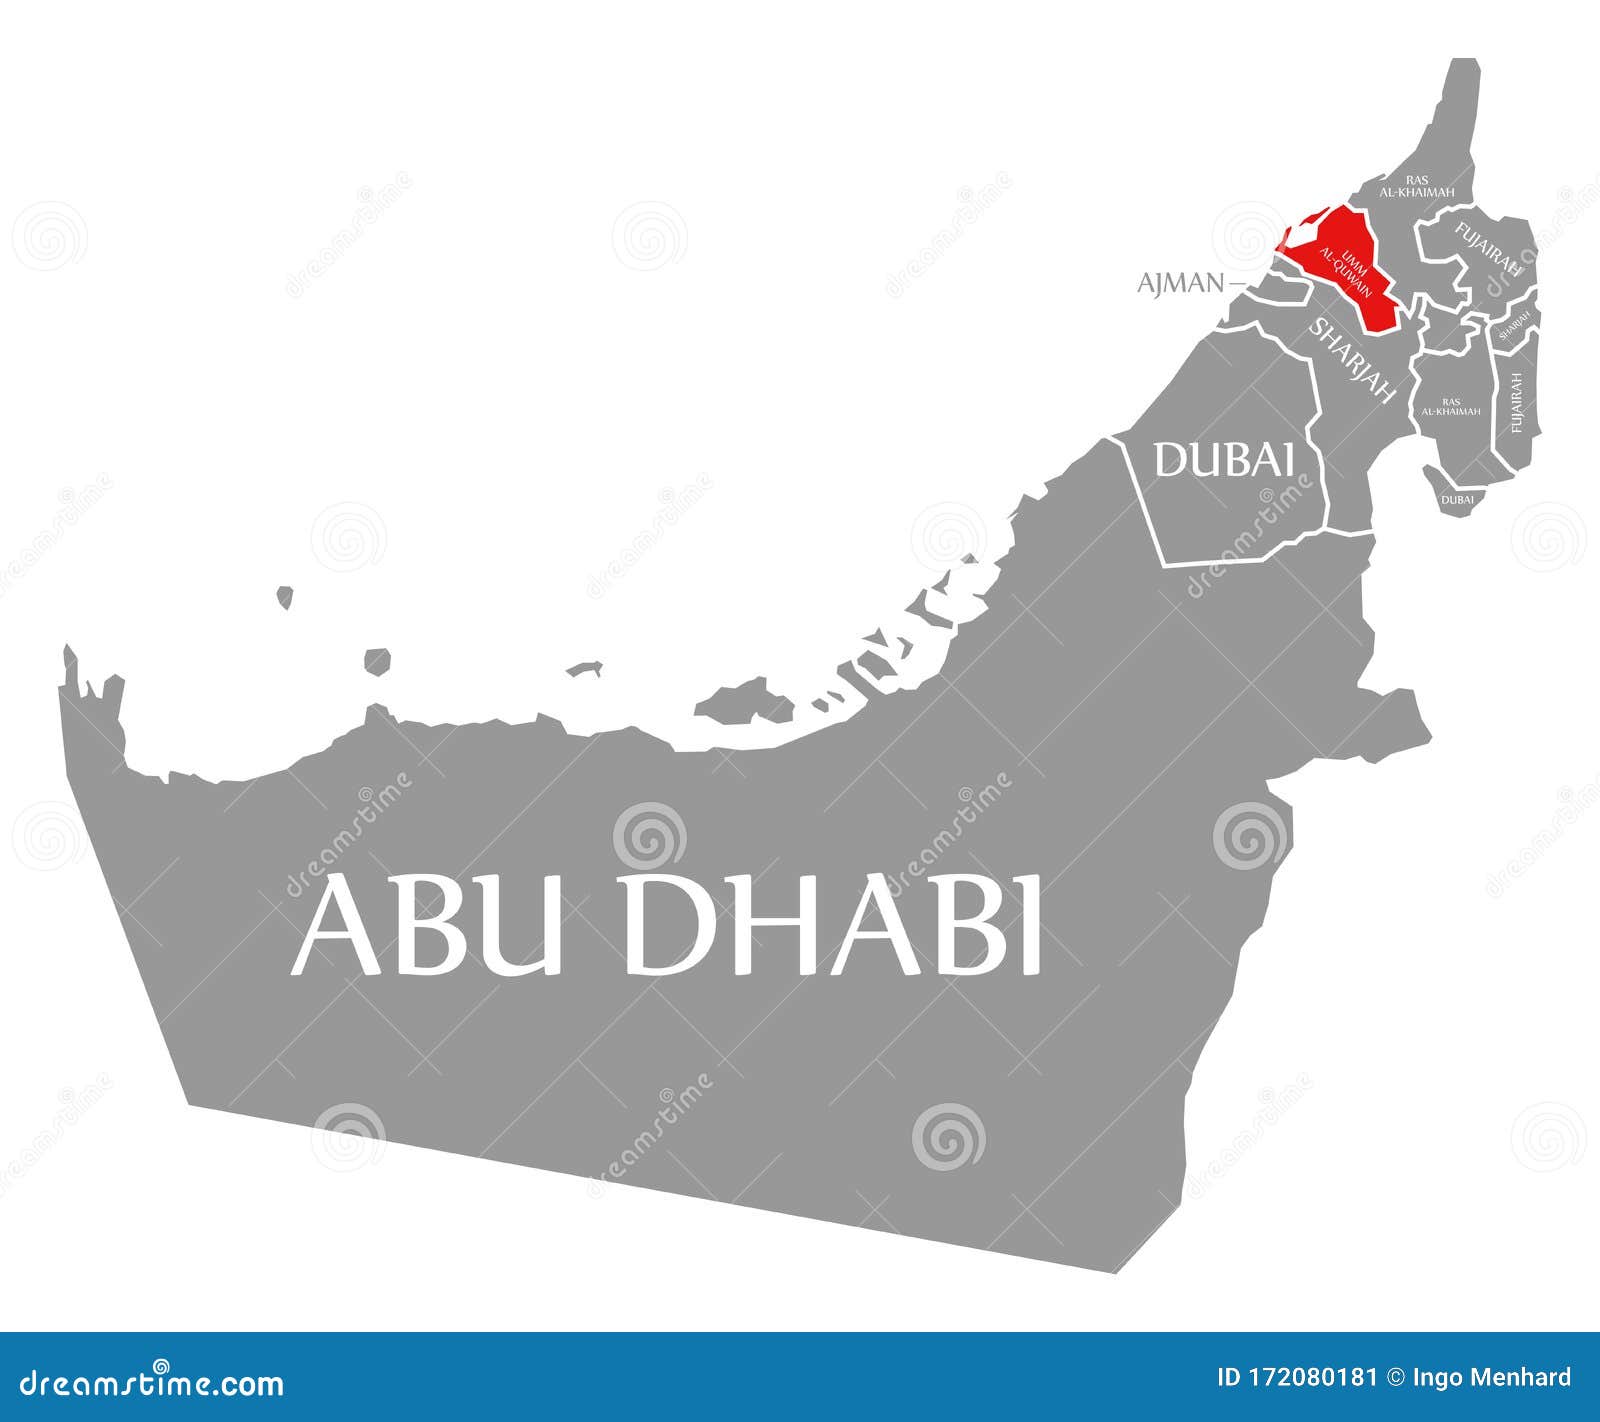 umm al quwain red highlighted in map of united arab emirates